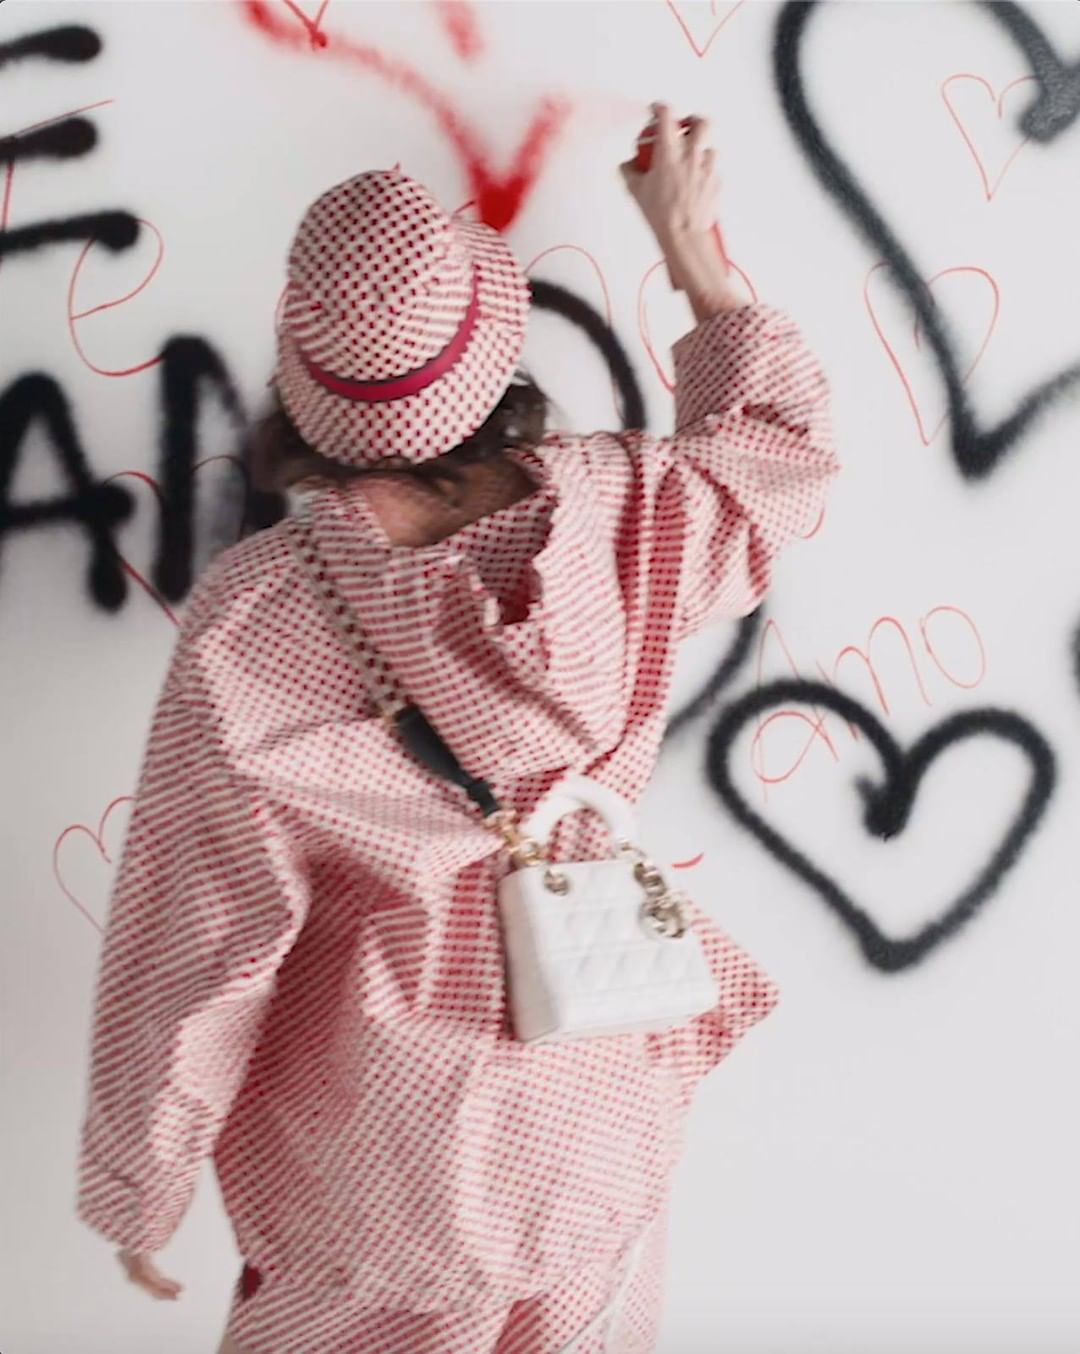 Dior Official - A celebration of love and affection, the #Dioramour capsule by @MariaGraziaChiuri draws on a sentiment that has been at the heart of the House since its founding. The emotion is evoked...